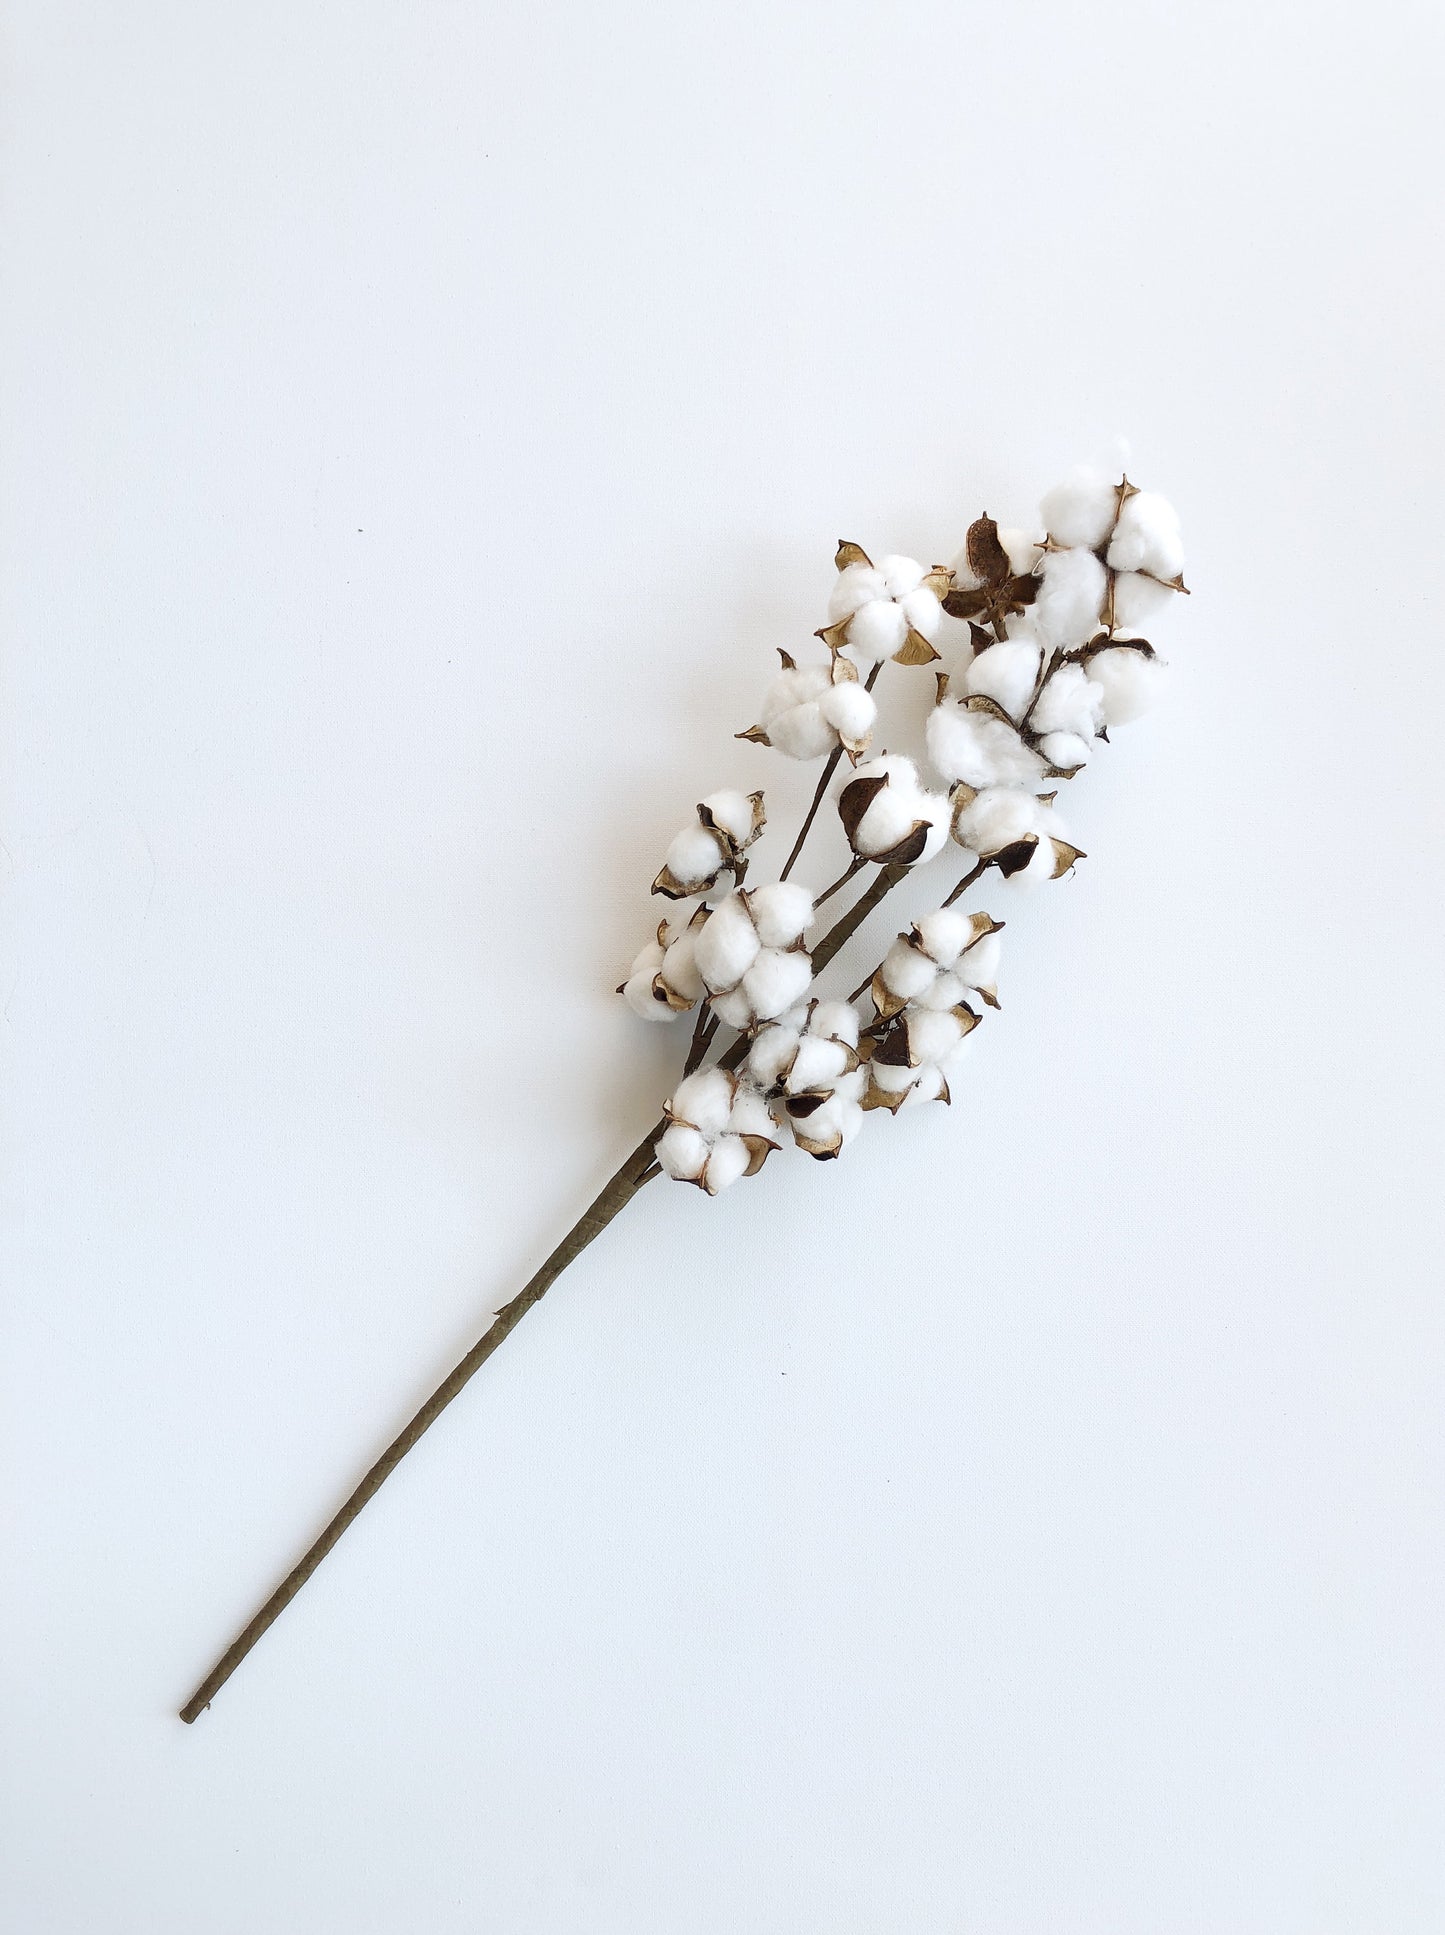 13" 18" 31" Cotton Stem, Cotton Balls, Branches, Bunch, Wedding, Rustic, Country, DIY, Flowers, Floral, Anniversary, Farmhouse, stems, white